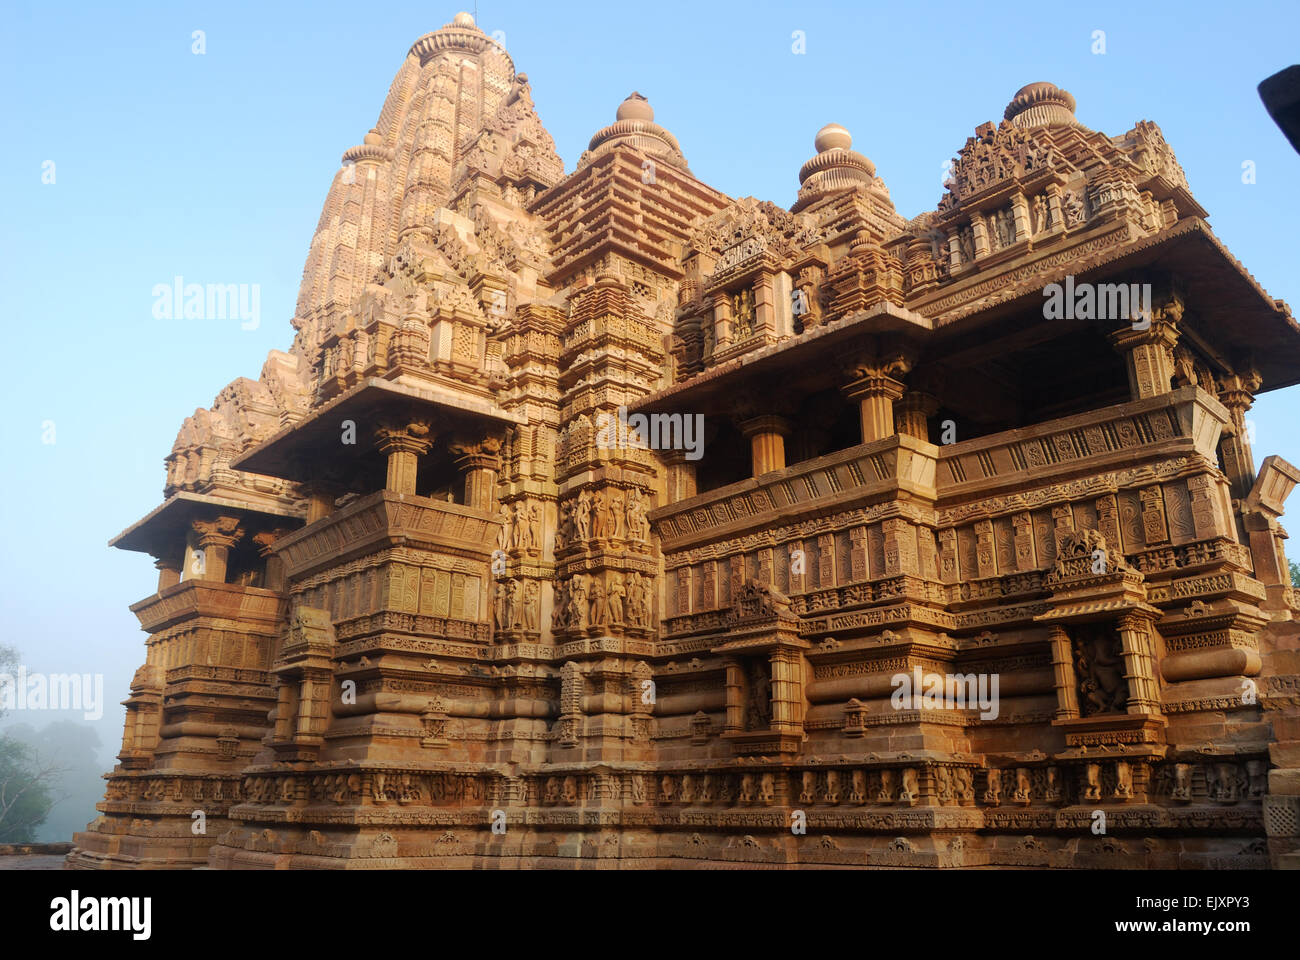 lakshmana temple western group of temples khajuraho india.This is a unesco world heritage site Stock Photo